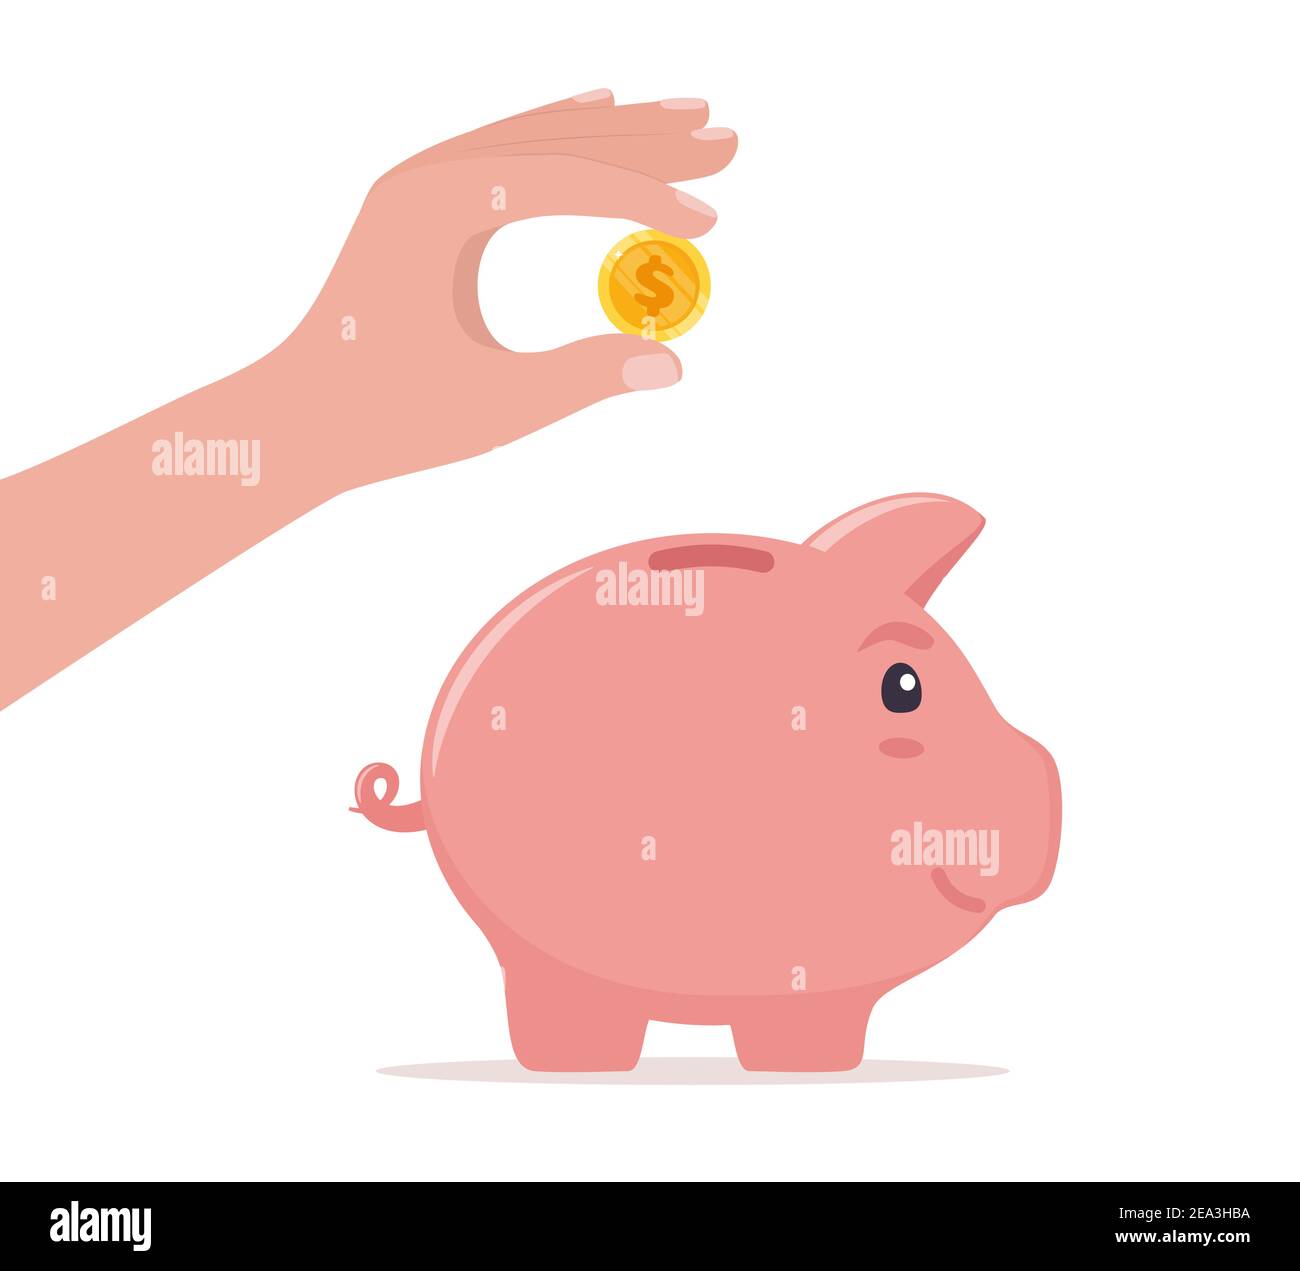 Human hand drops coin into piggy bank. Money saving, economy, investment, banking or business services concept. Profit, income, earnings, budget, fund Stock Vector